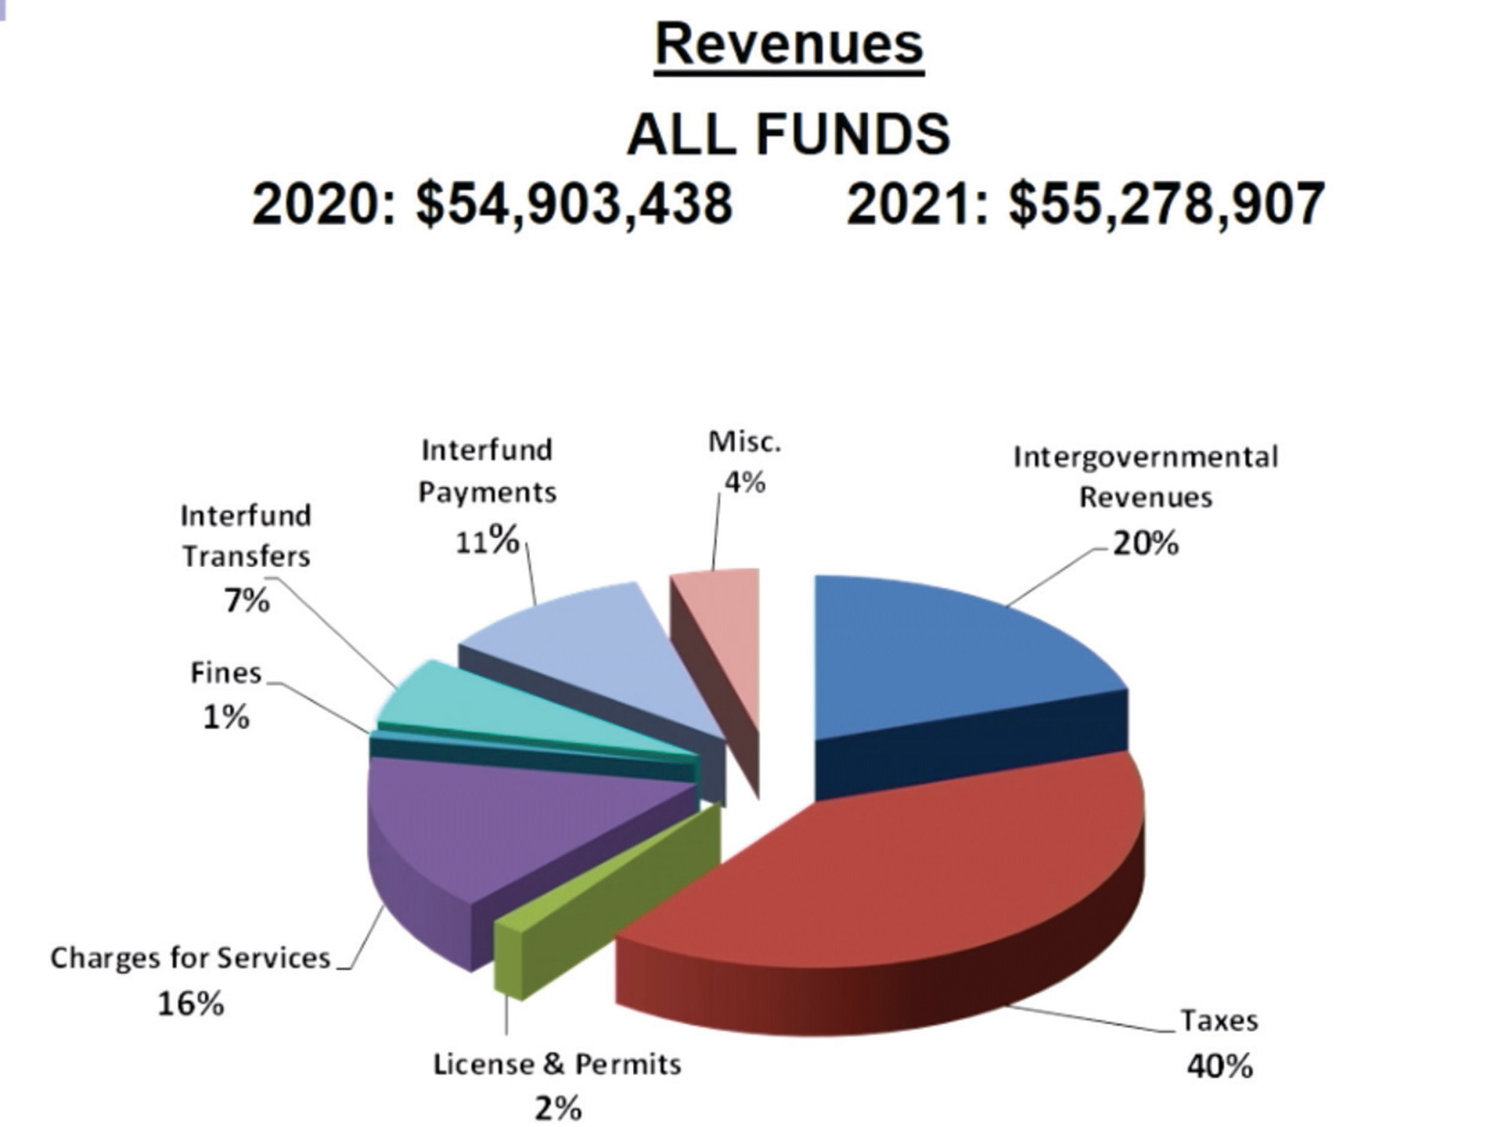 Jefferson county revenues by category in the county’s biennial budget for 2020 and 2021.